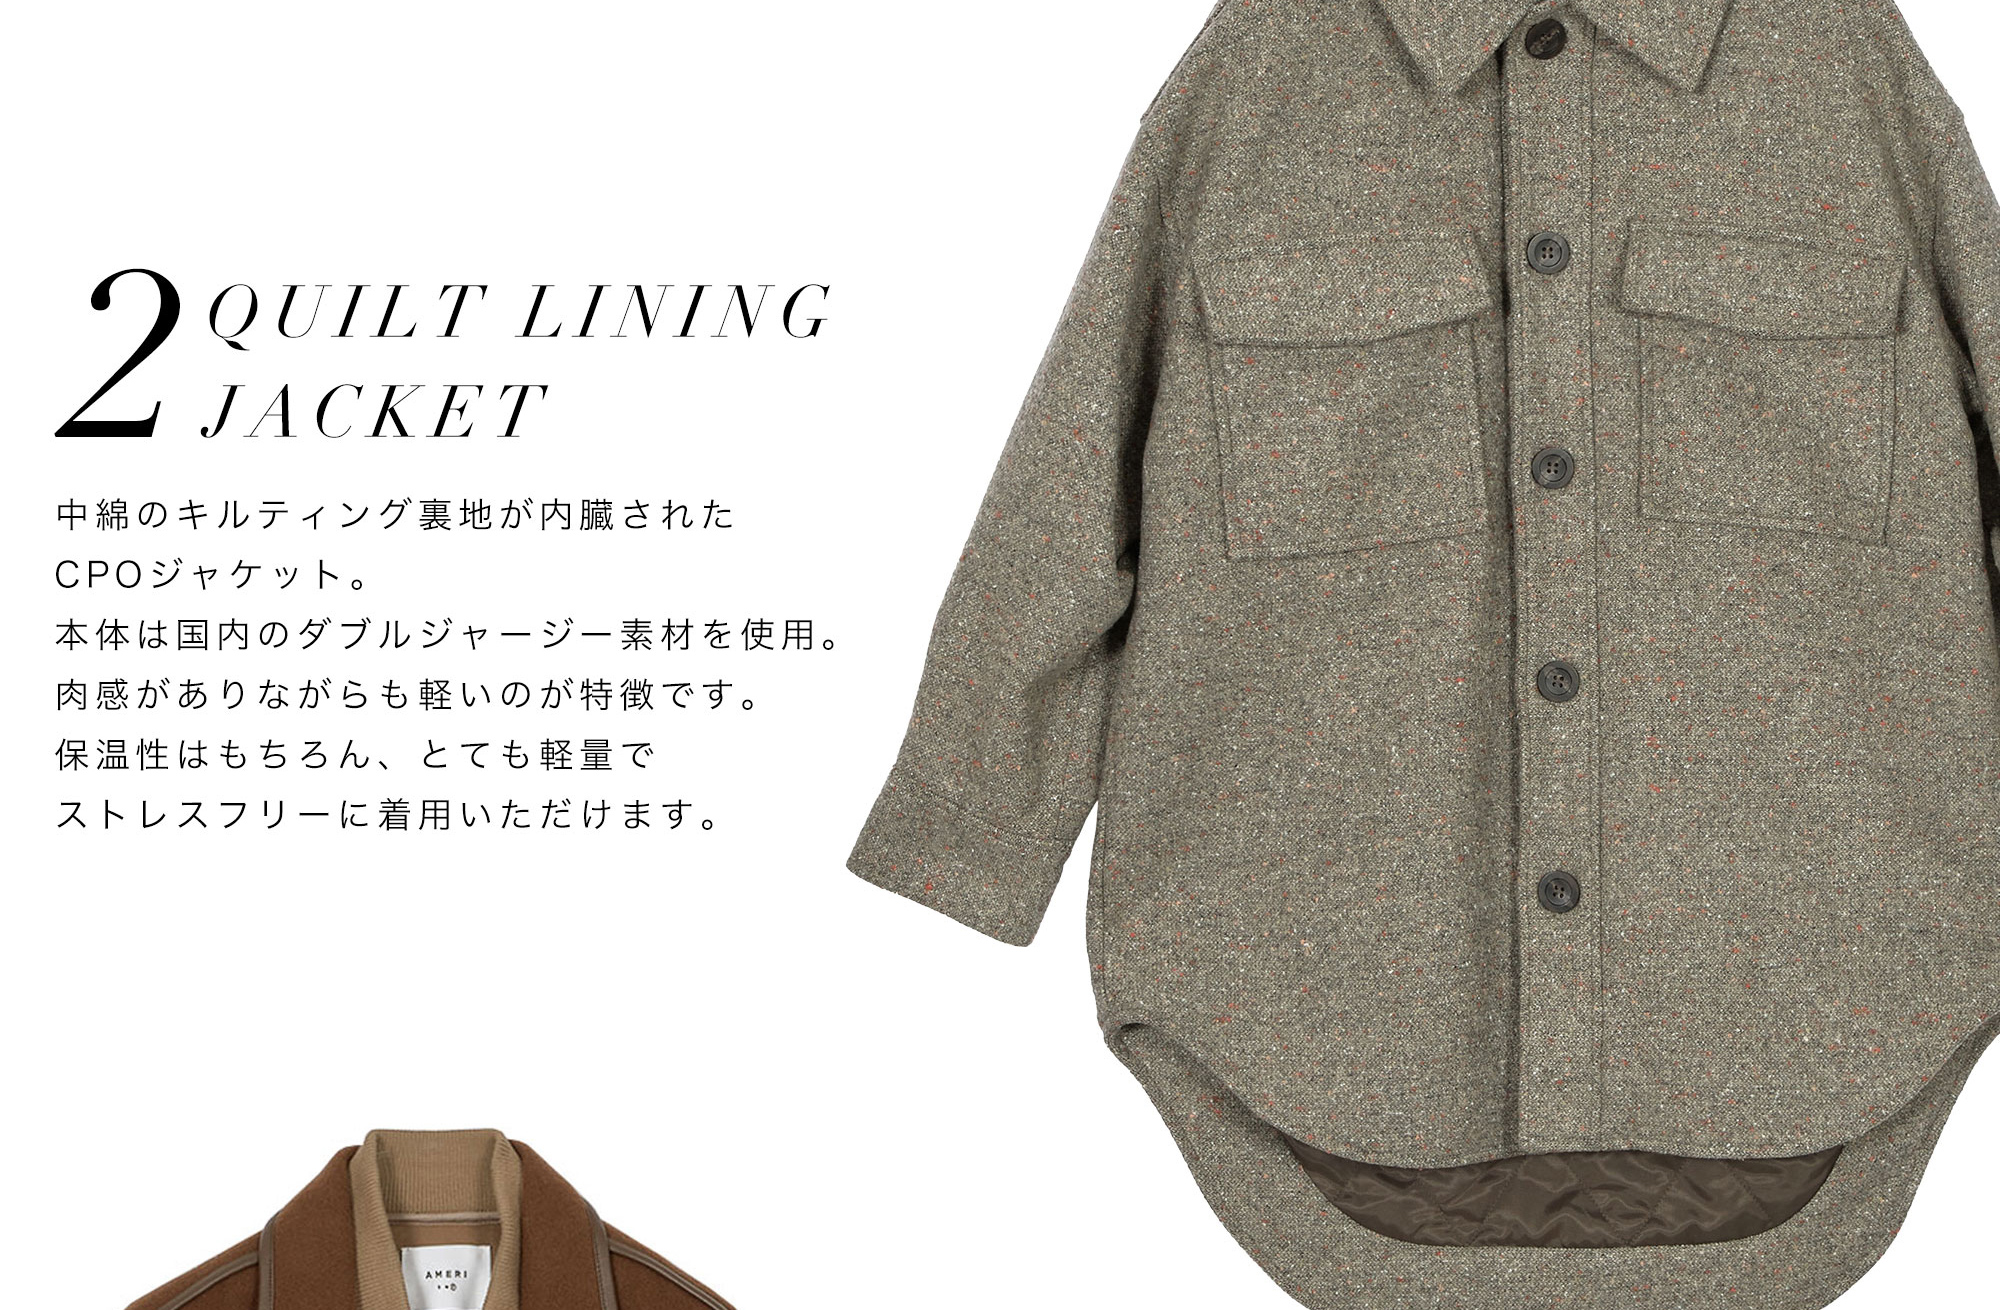 Ameri VINTAGE(アメリ ヴィンテージ)直営通販サイト / KNIT&OUTER 10%OFF